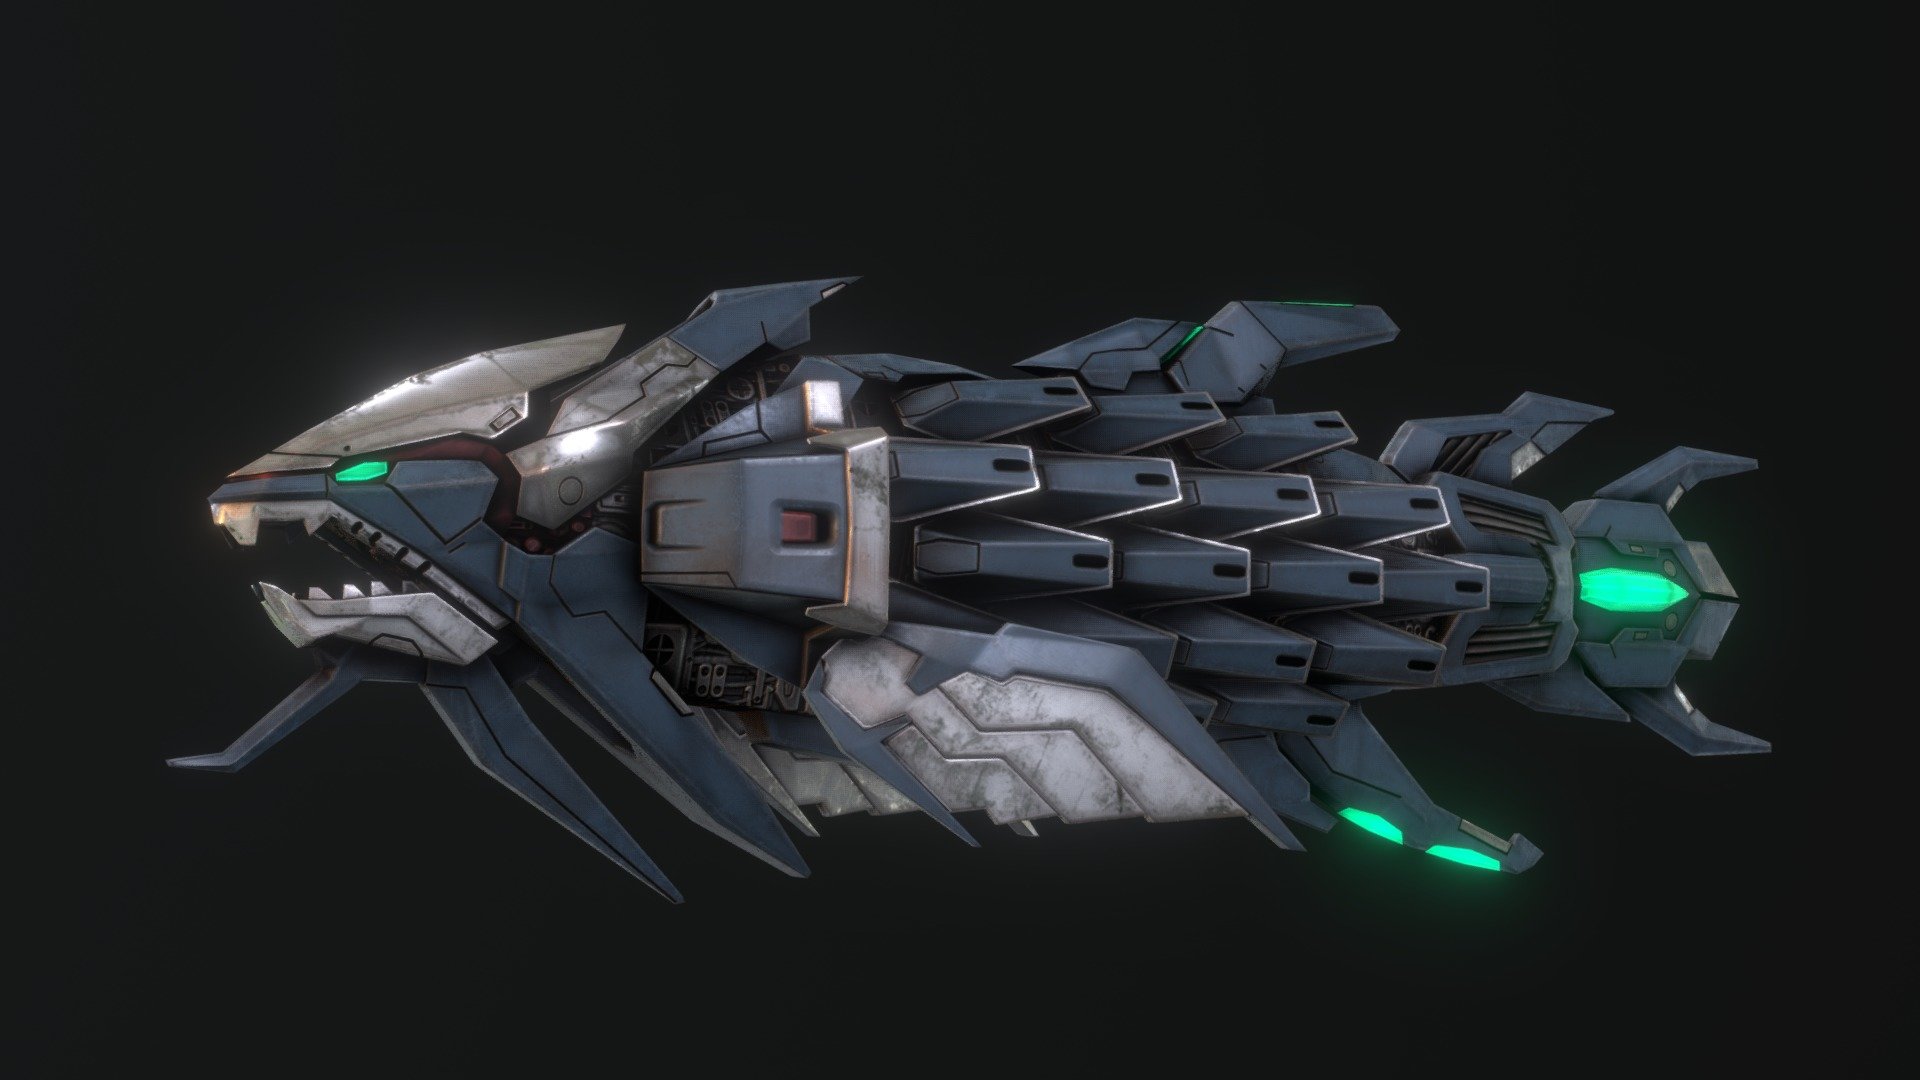 WARNING!
A HUGE BATTLESHIP
IRON FOSSIL
IS APPROACHING FAST!
Iron Fossil from Taito's Darius shoot-em-up series, something that I've been playing a lot of in my spare time recently. Made as a bit of fanart.

Made in 3DSMax and Substance Painter 3d model